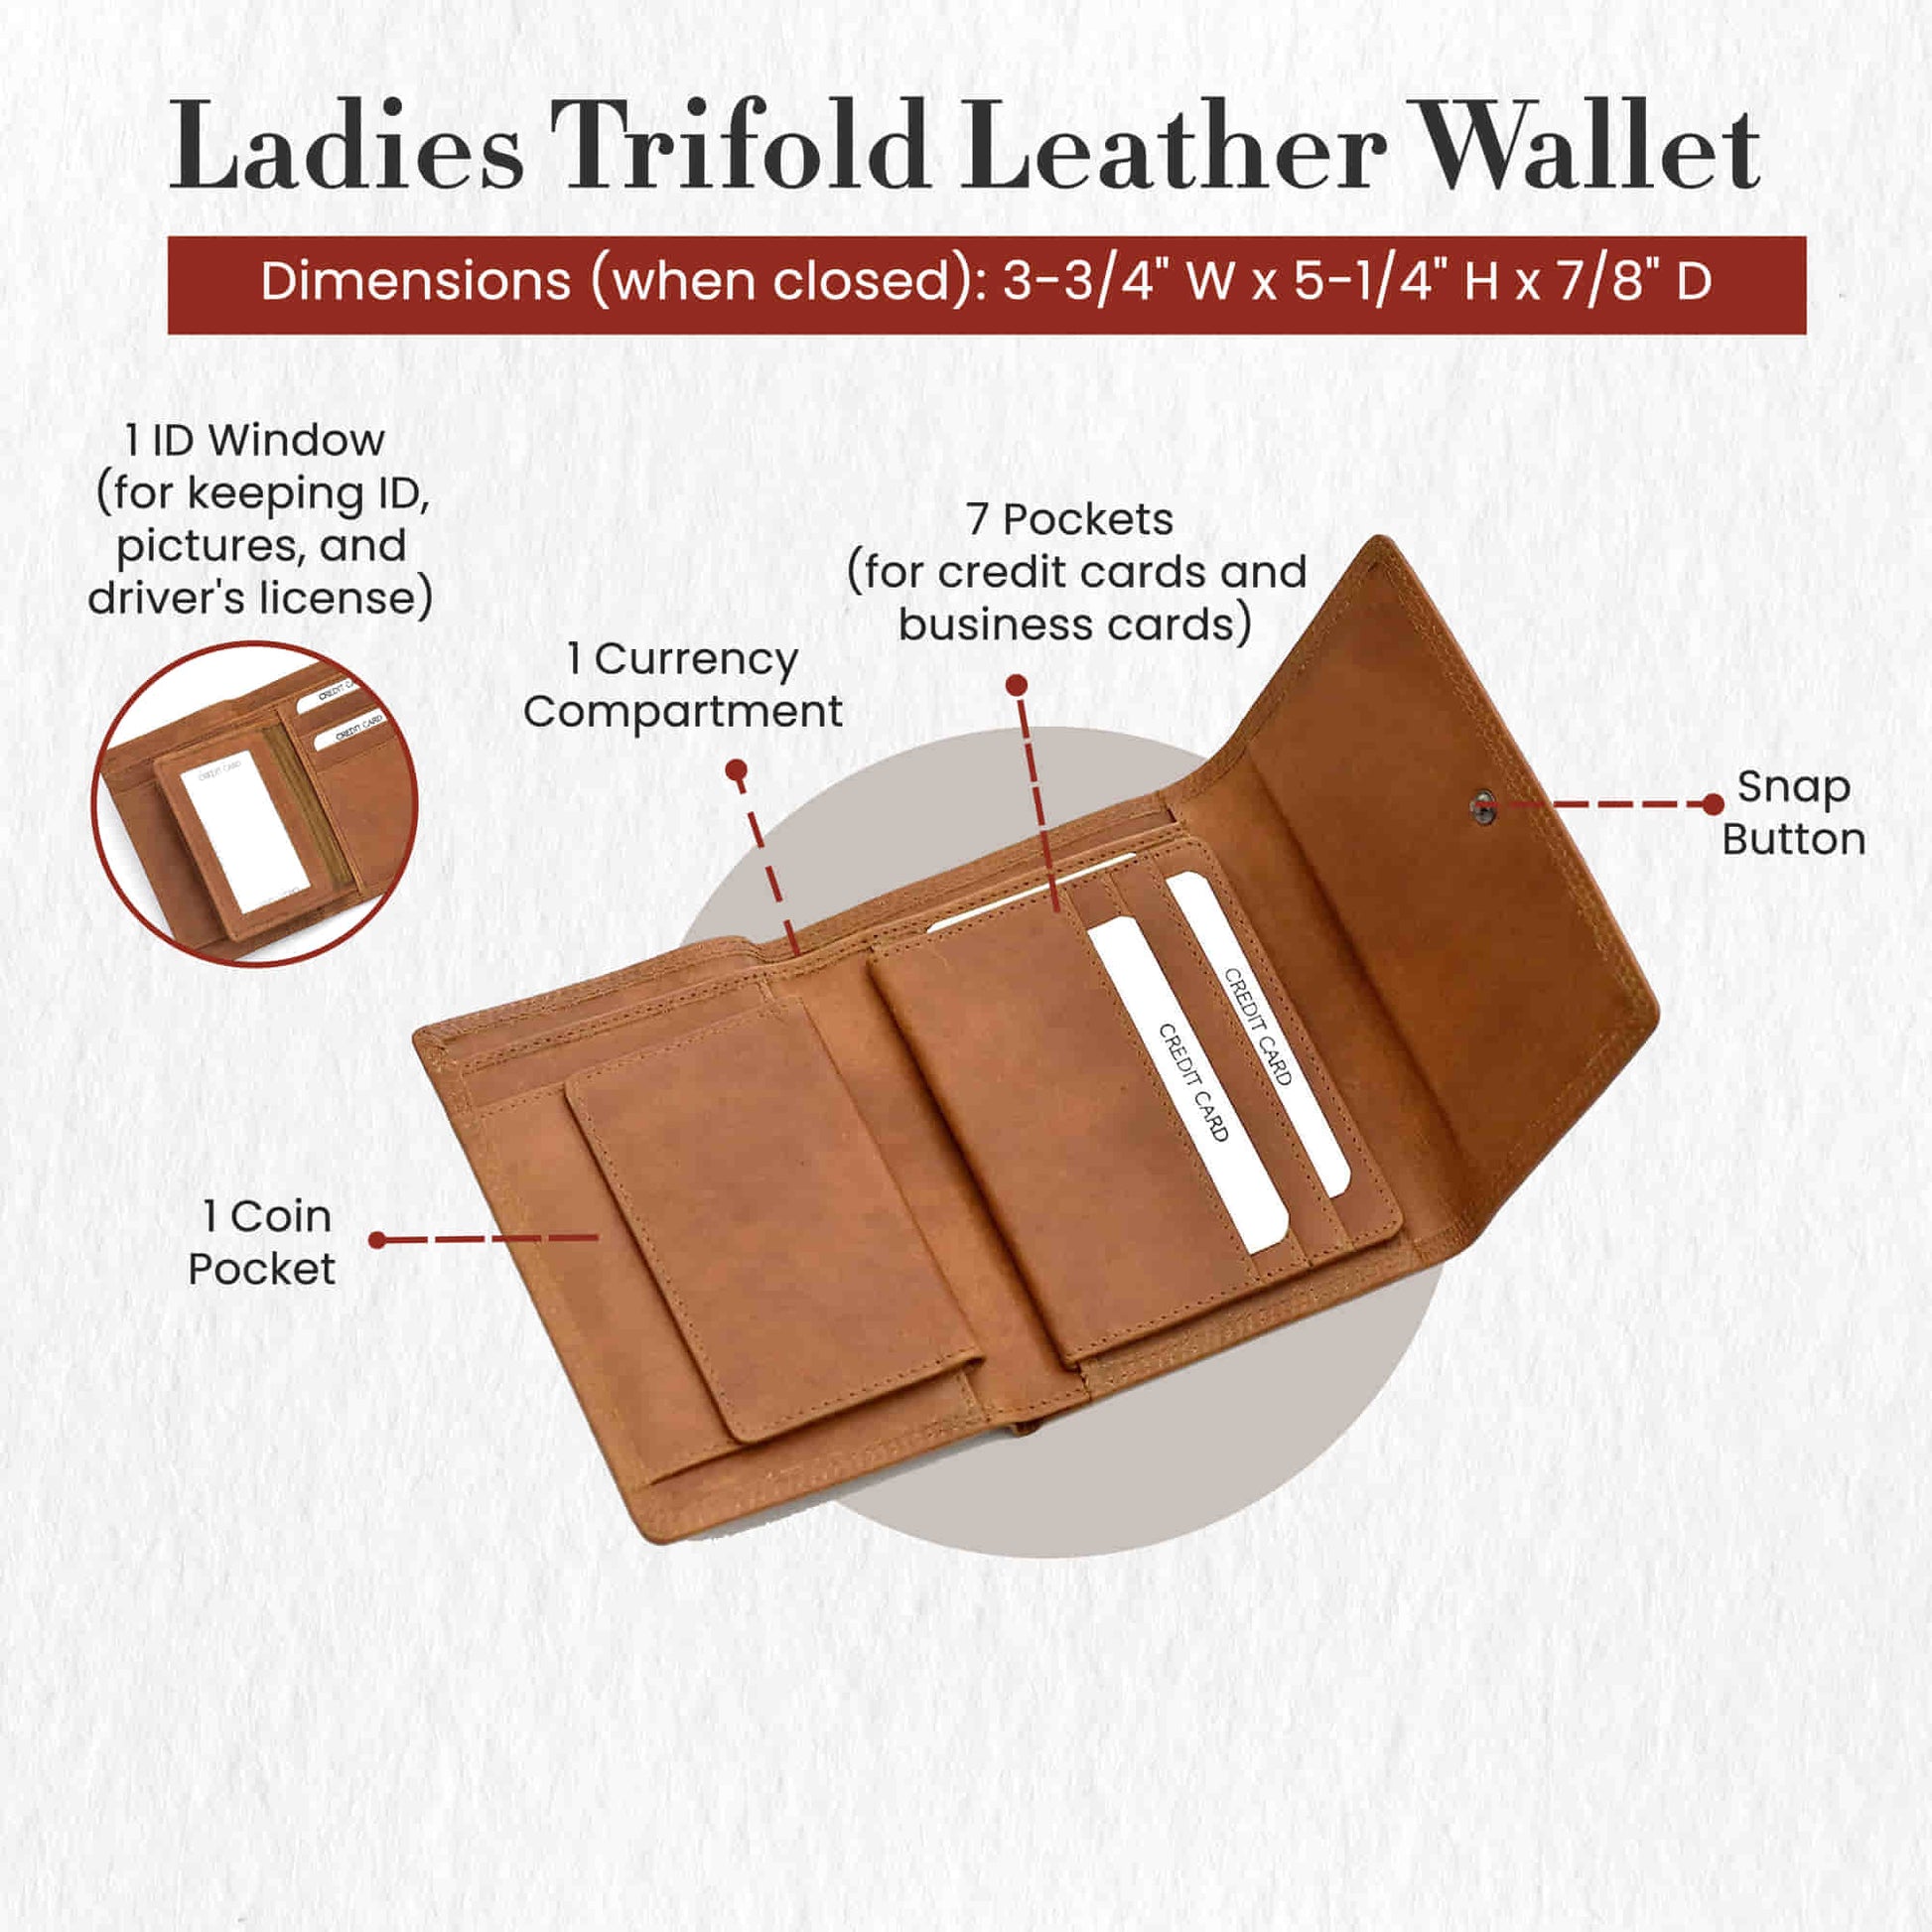 Style N Craft 300799-CG Ladies Trifold Wallet with Snap Button in Tan Leather